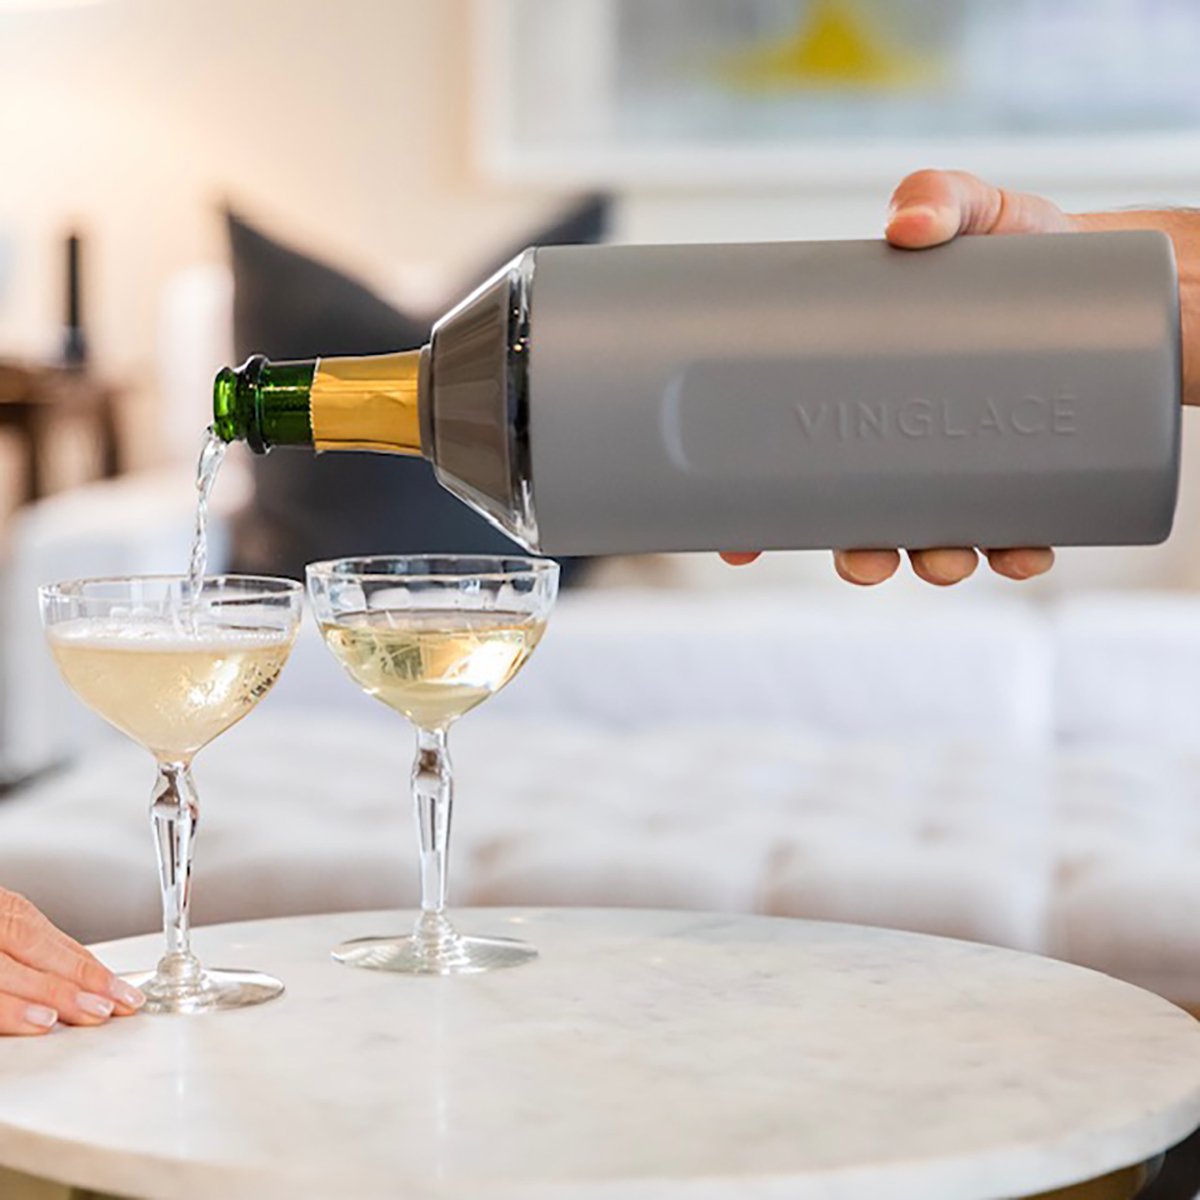 Vinglace Insulated Wine Glass